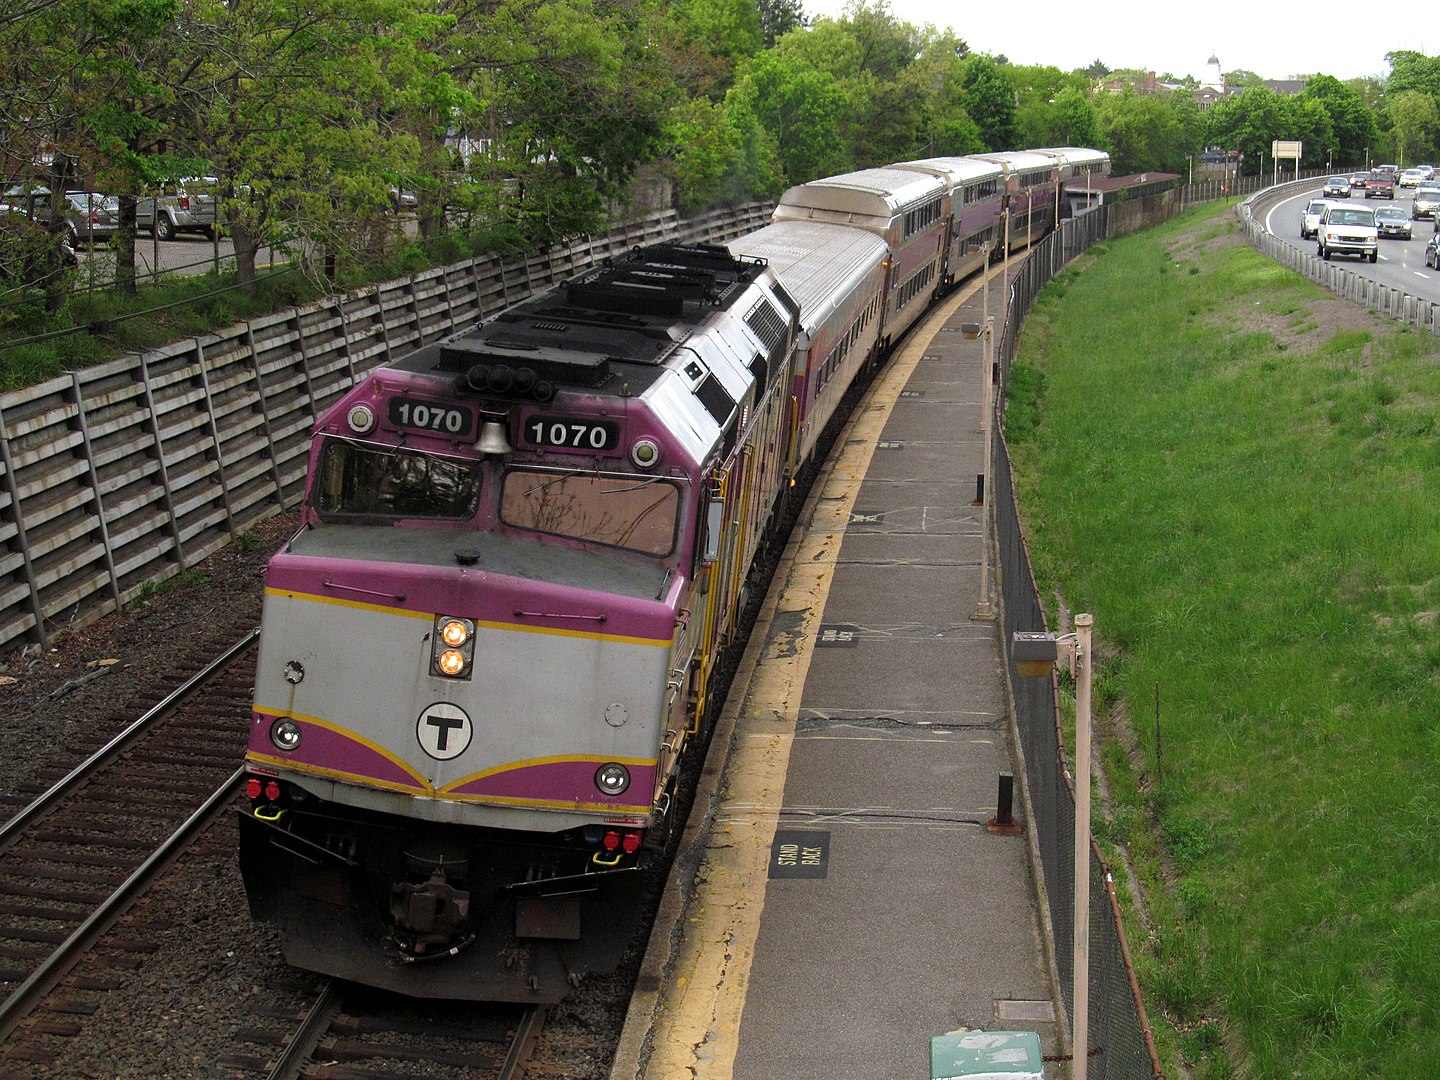 An MBTA train stopped at the Auburndale station in Newton.